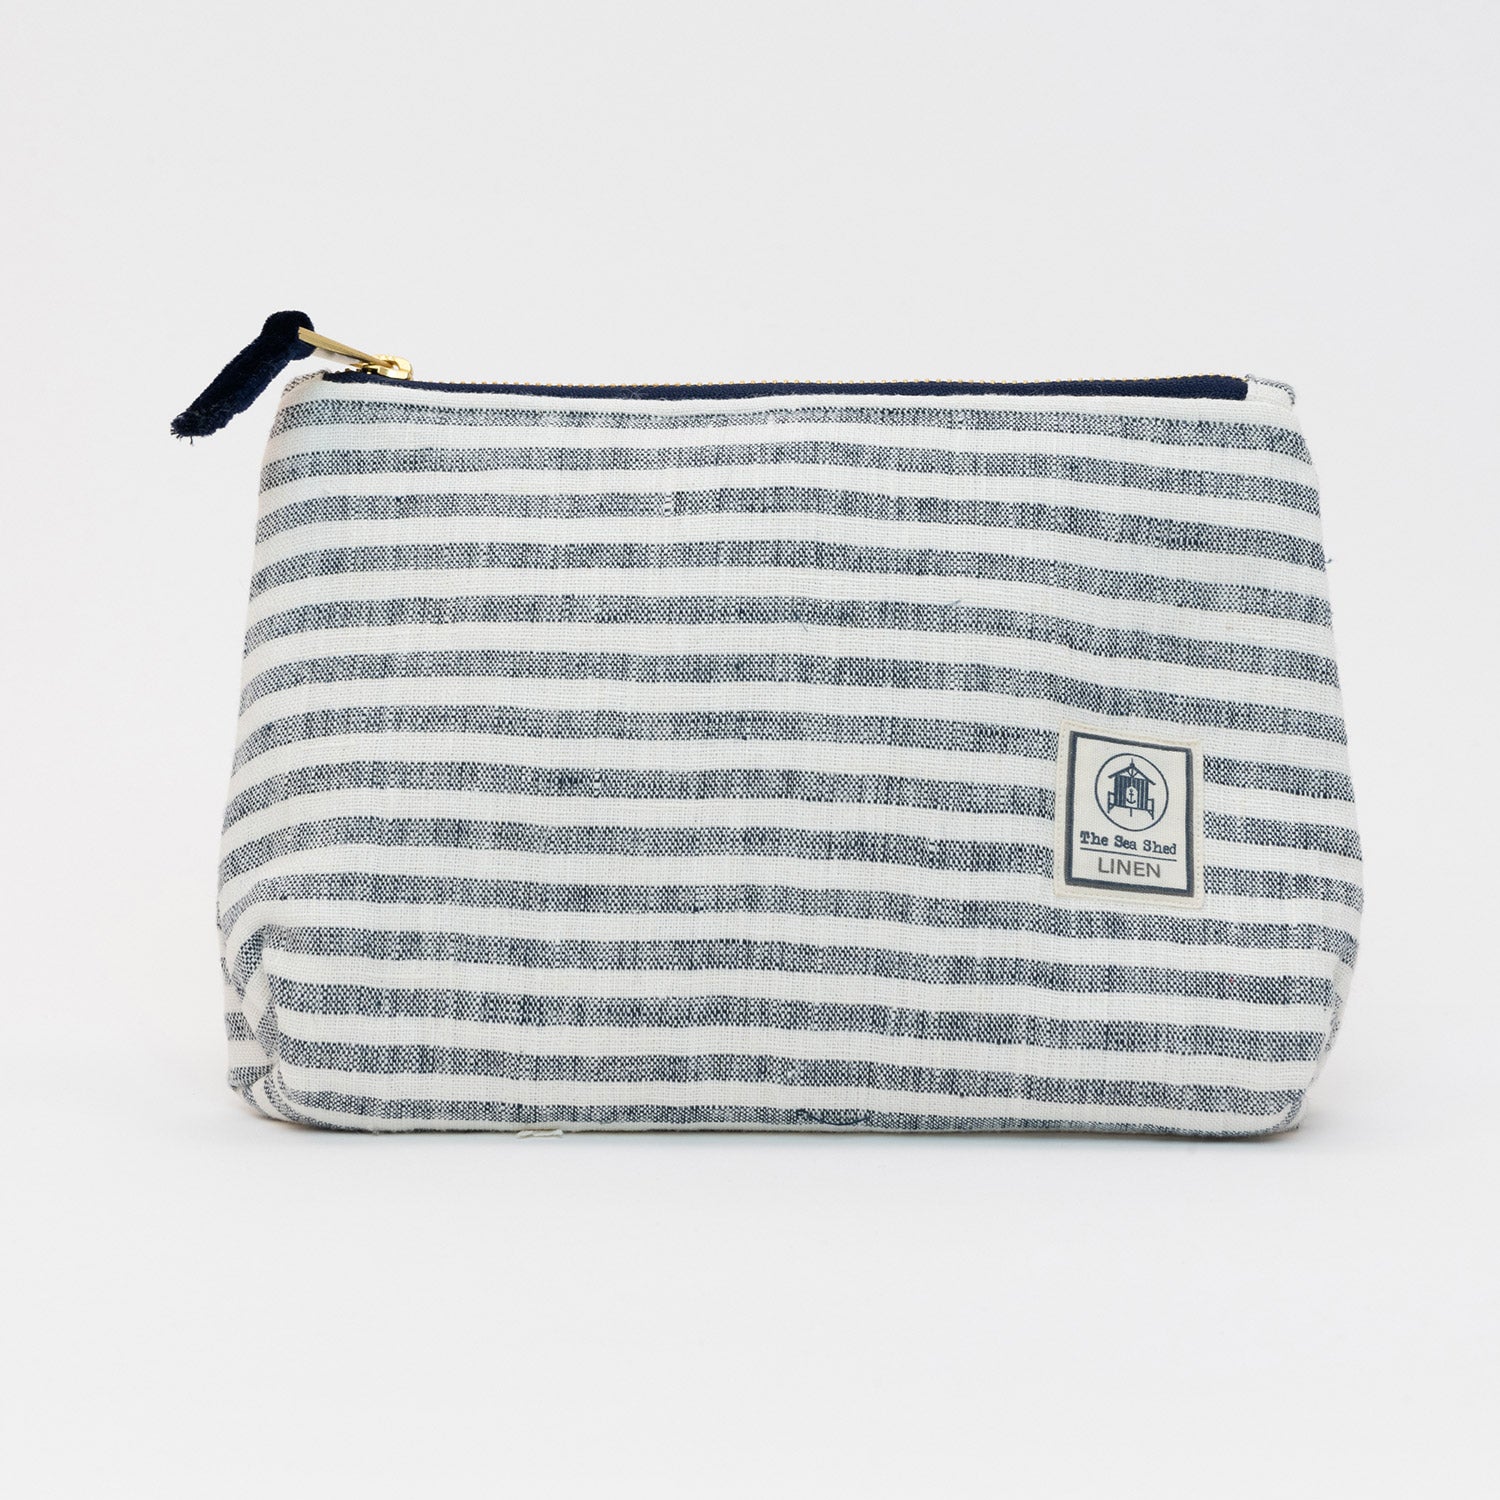 A photo of the large linen cosmetic bag on a white background. It has white and blue stripes.